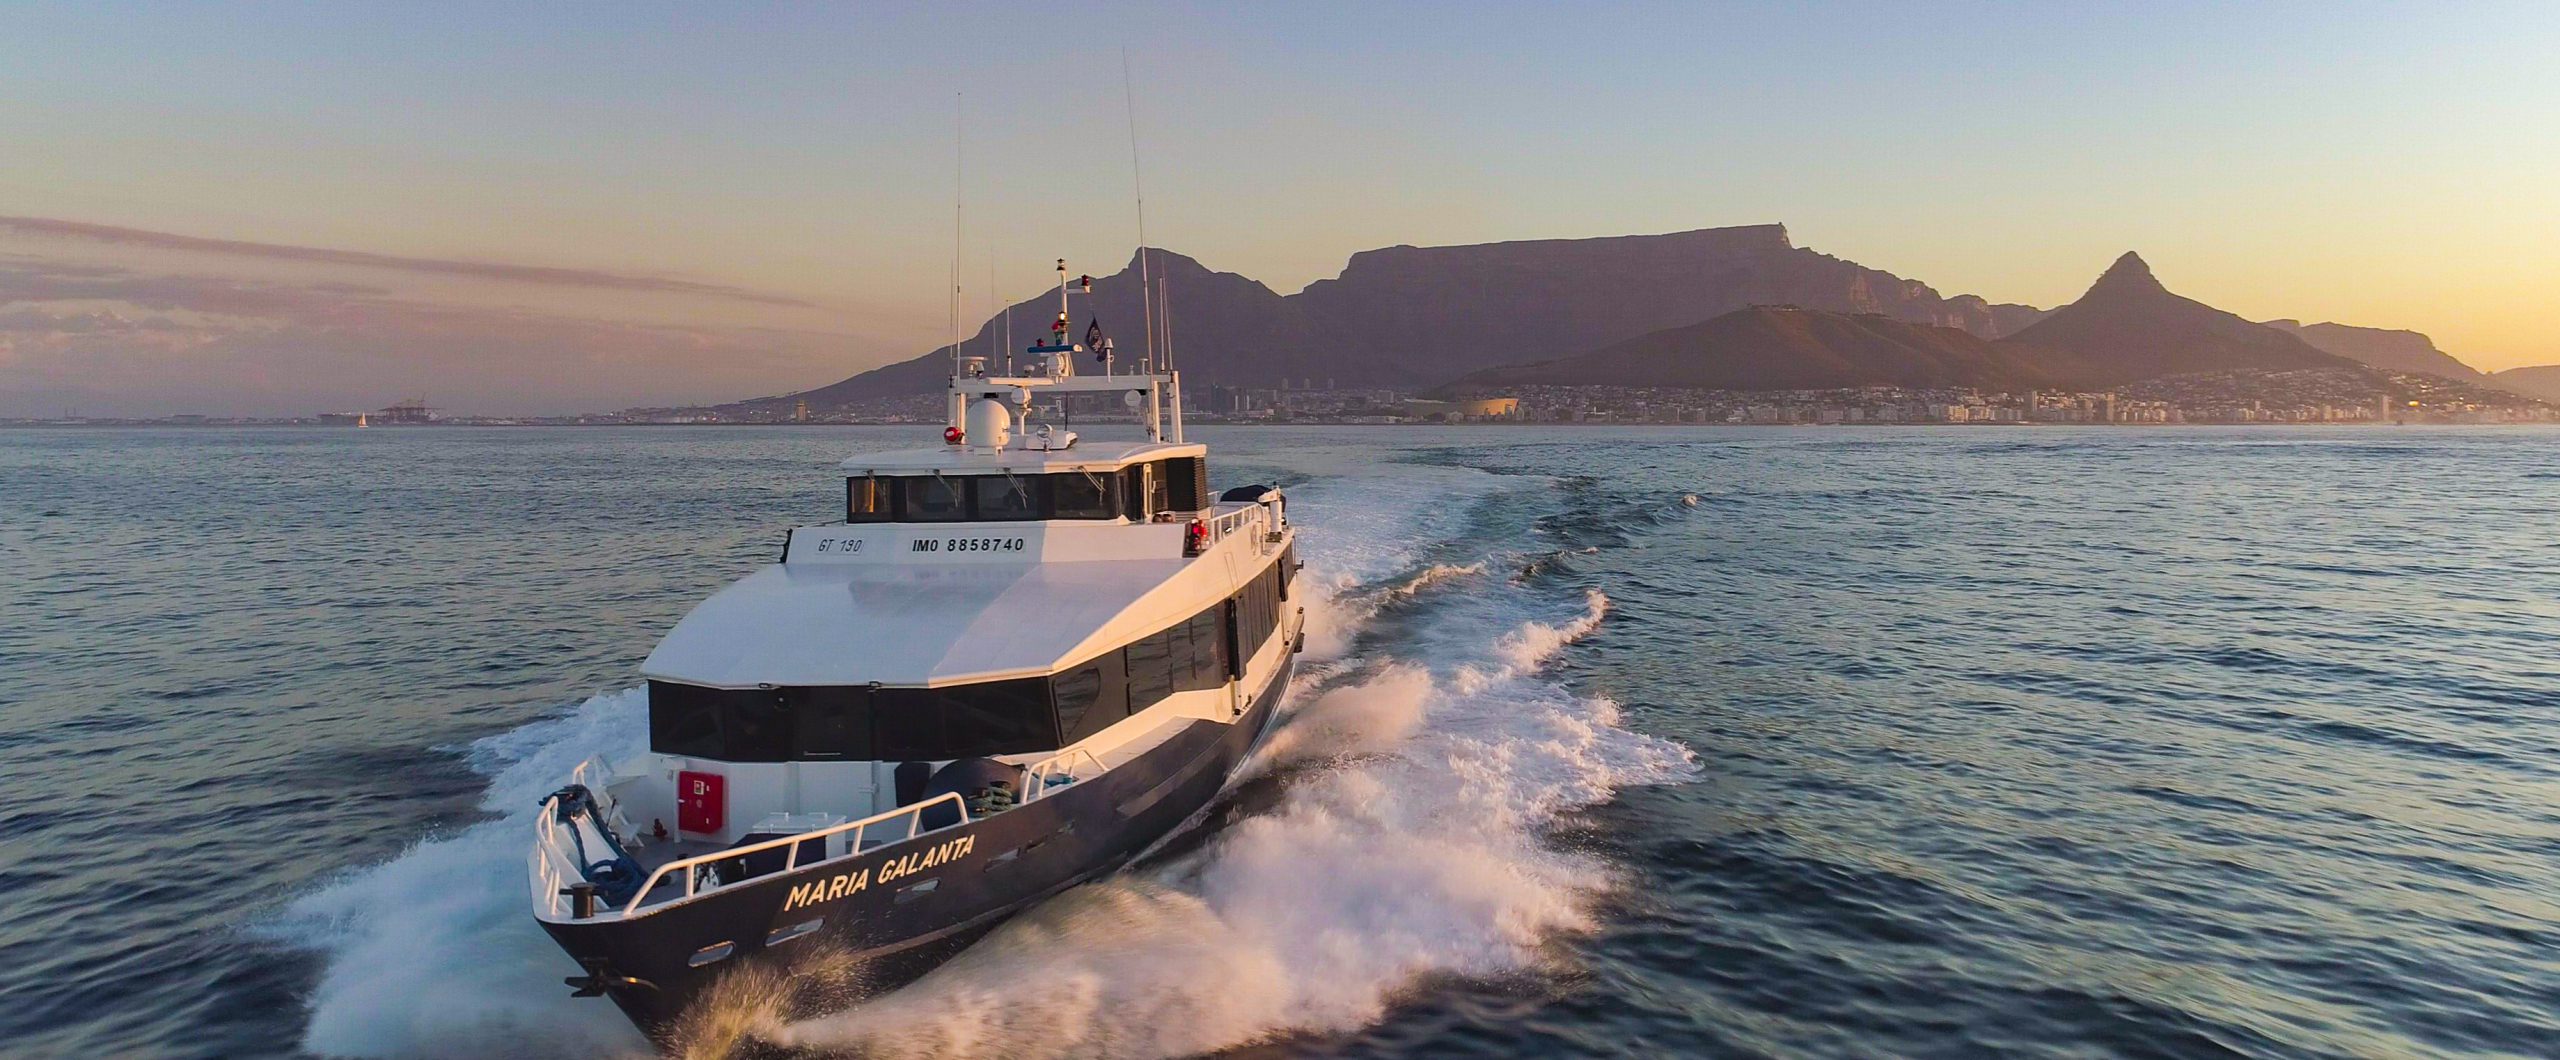 Peschaud deploys passenger experience aboard its vessels with Moment